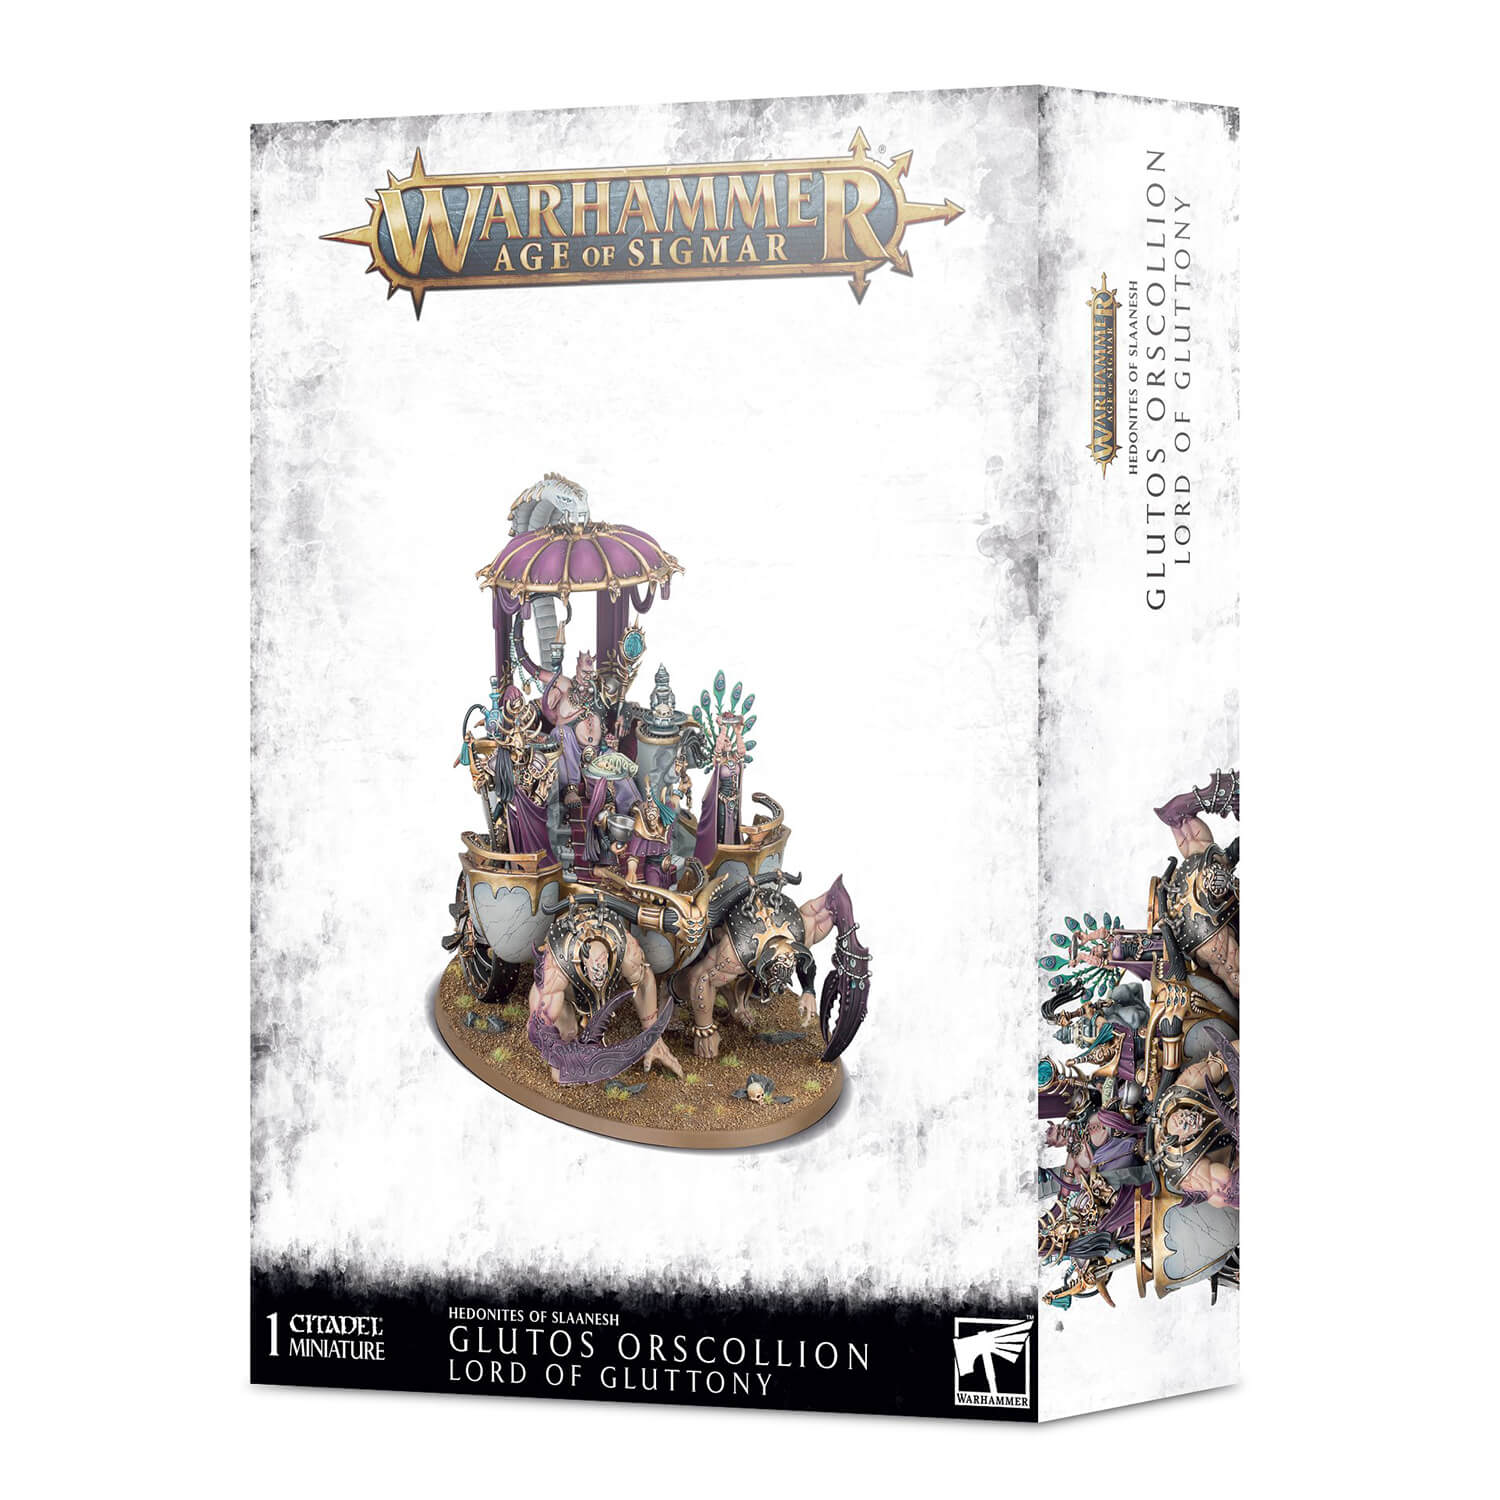 Warhammer Age of Sigmar Hedonites of Slaanesh Glutos Orscollion Lord of Gluttony